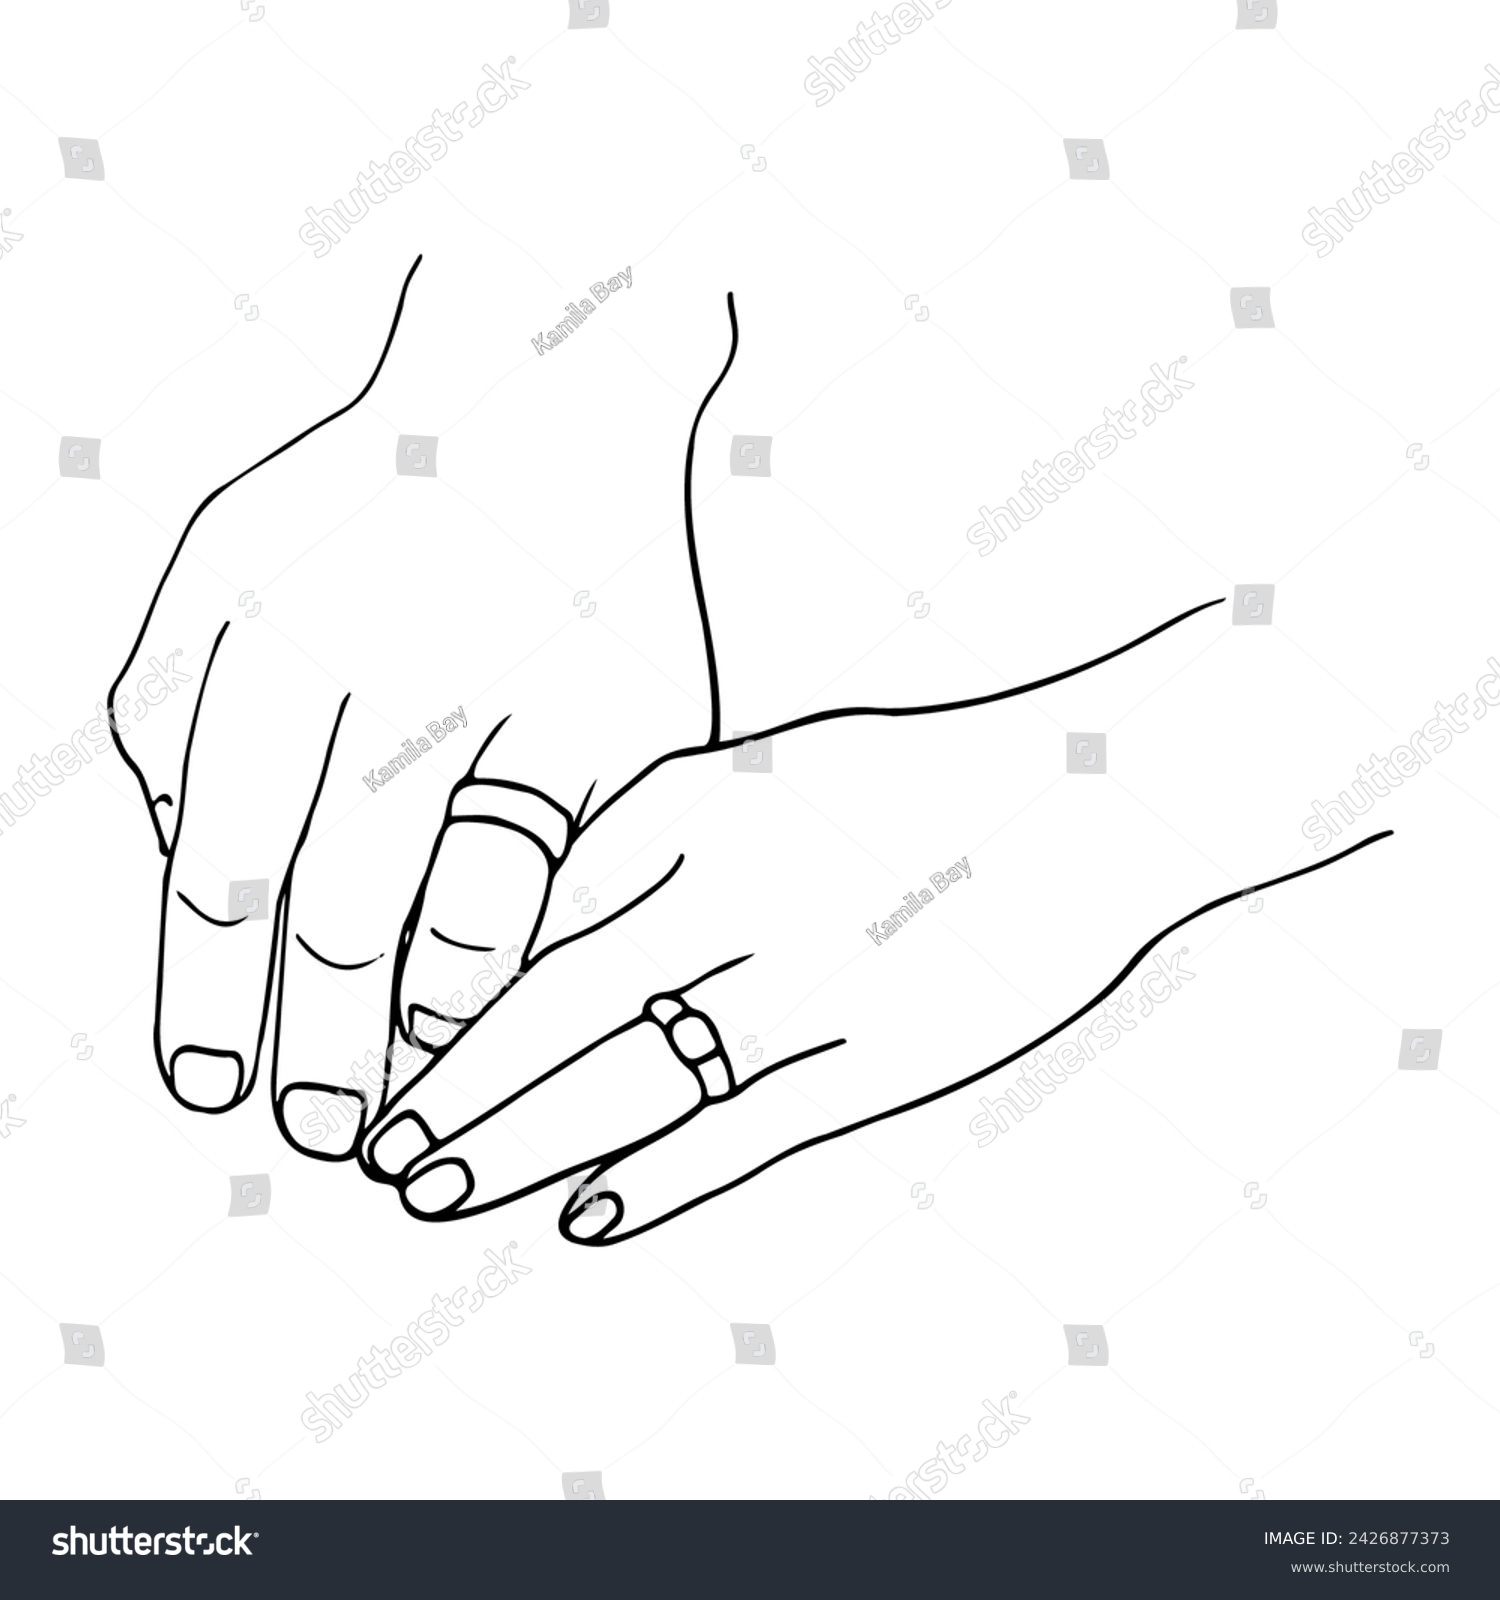 SVG of male and female hands intertwined, on each hand a ring on the ring finger. hand drawn illustration newlyweds, married or just engaged svg